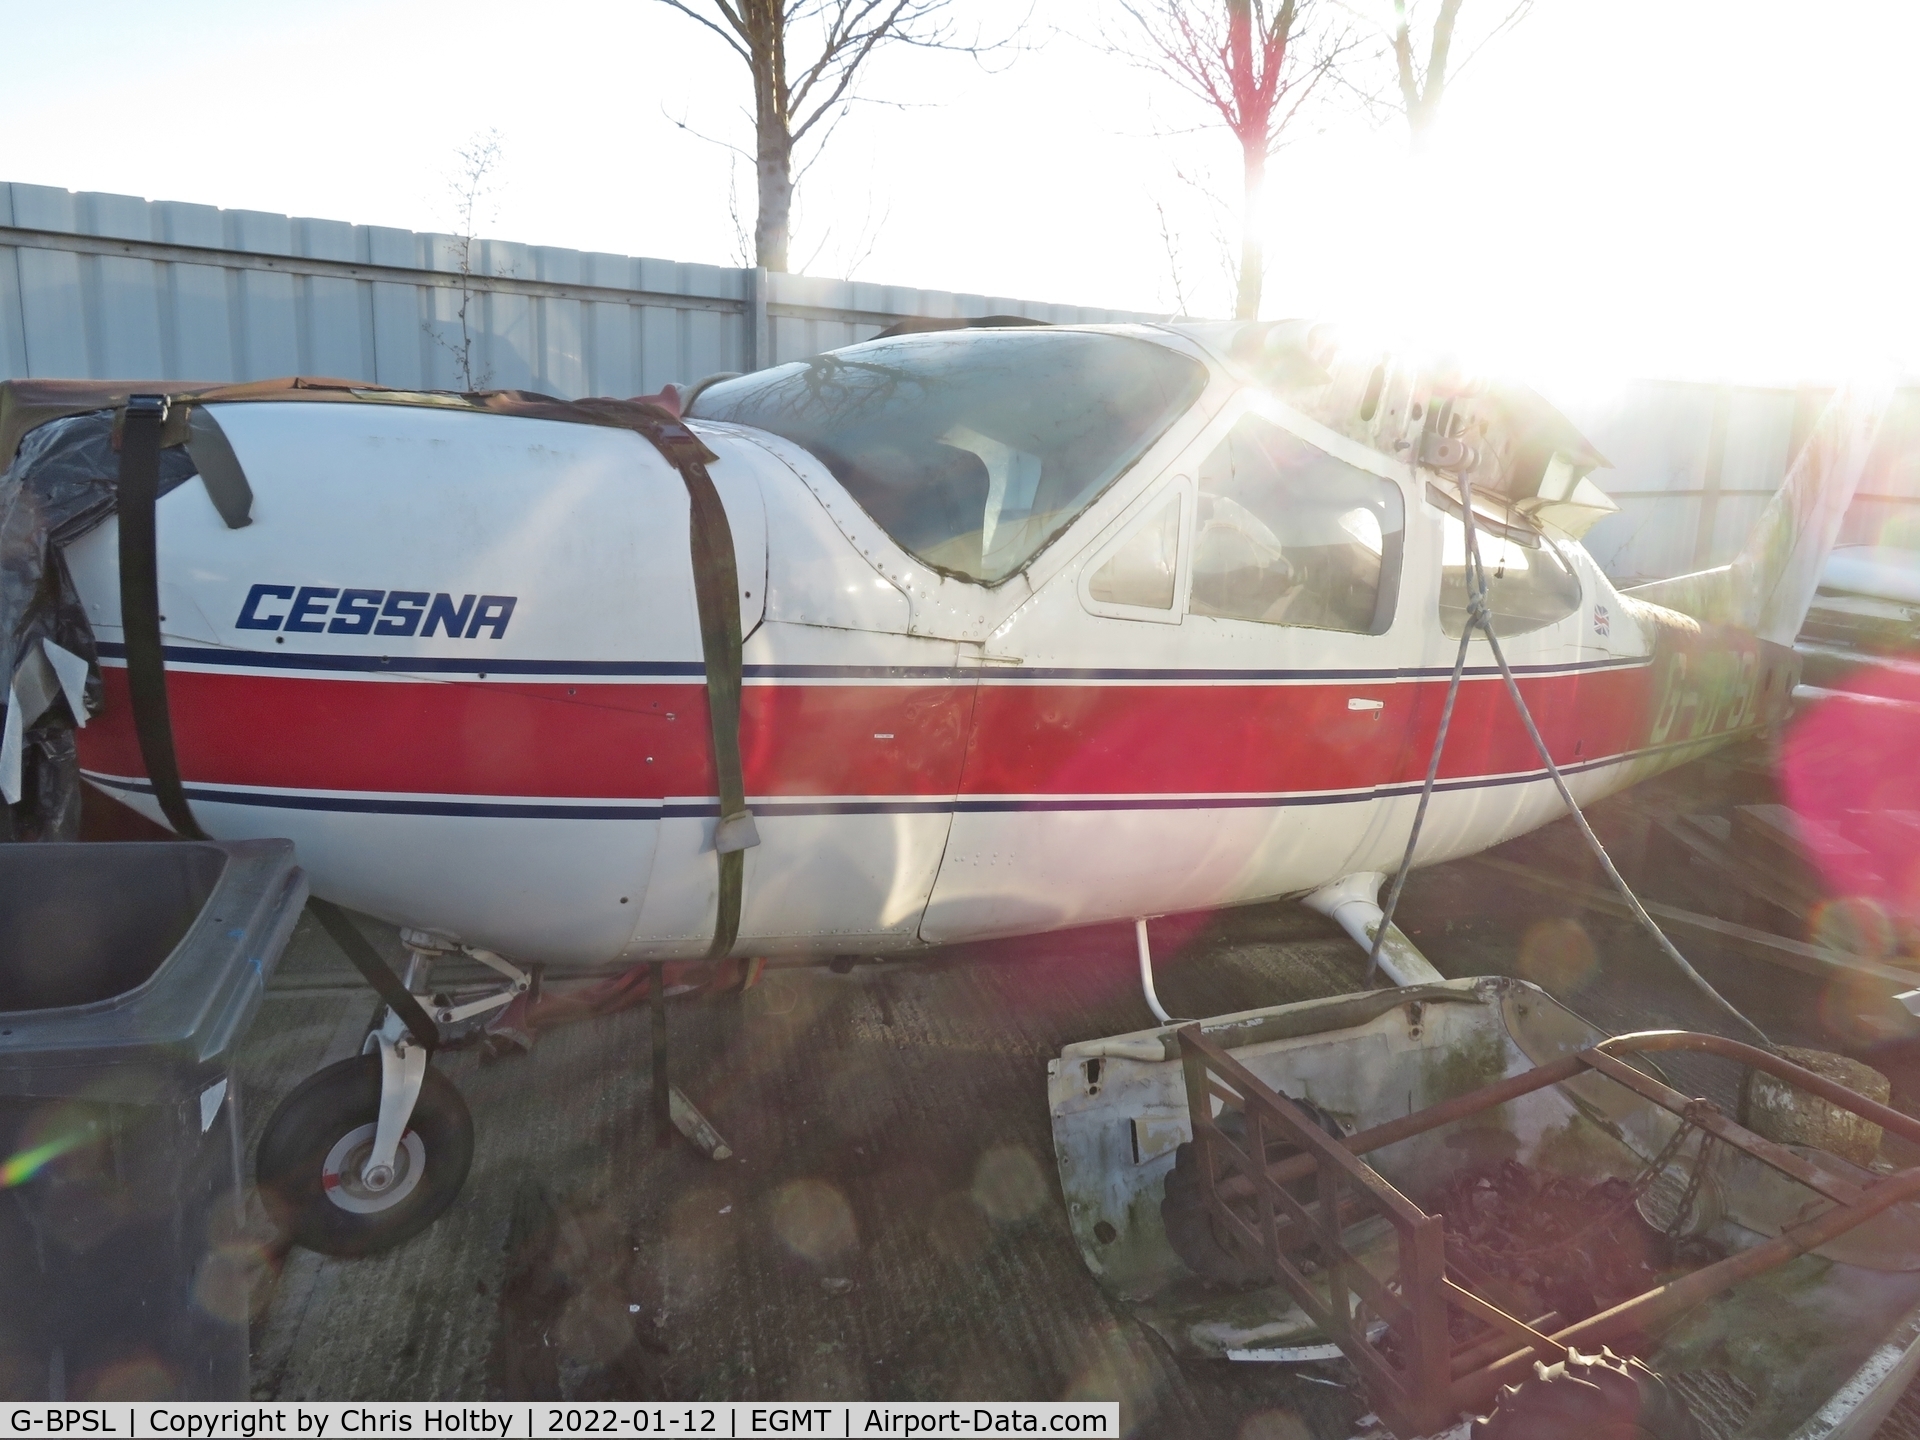 G-BPSL, 1968 Cessna 177 Cardinal C/N 17701138, Deregistered and withdrawn from use on 20.1.16 and now stored and deteriorating at Thurrock Airfield, Essex